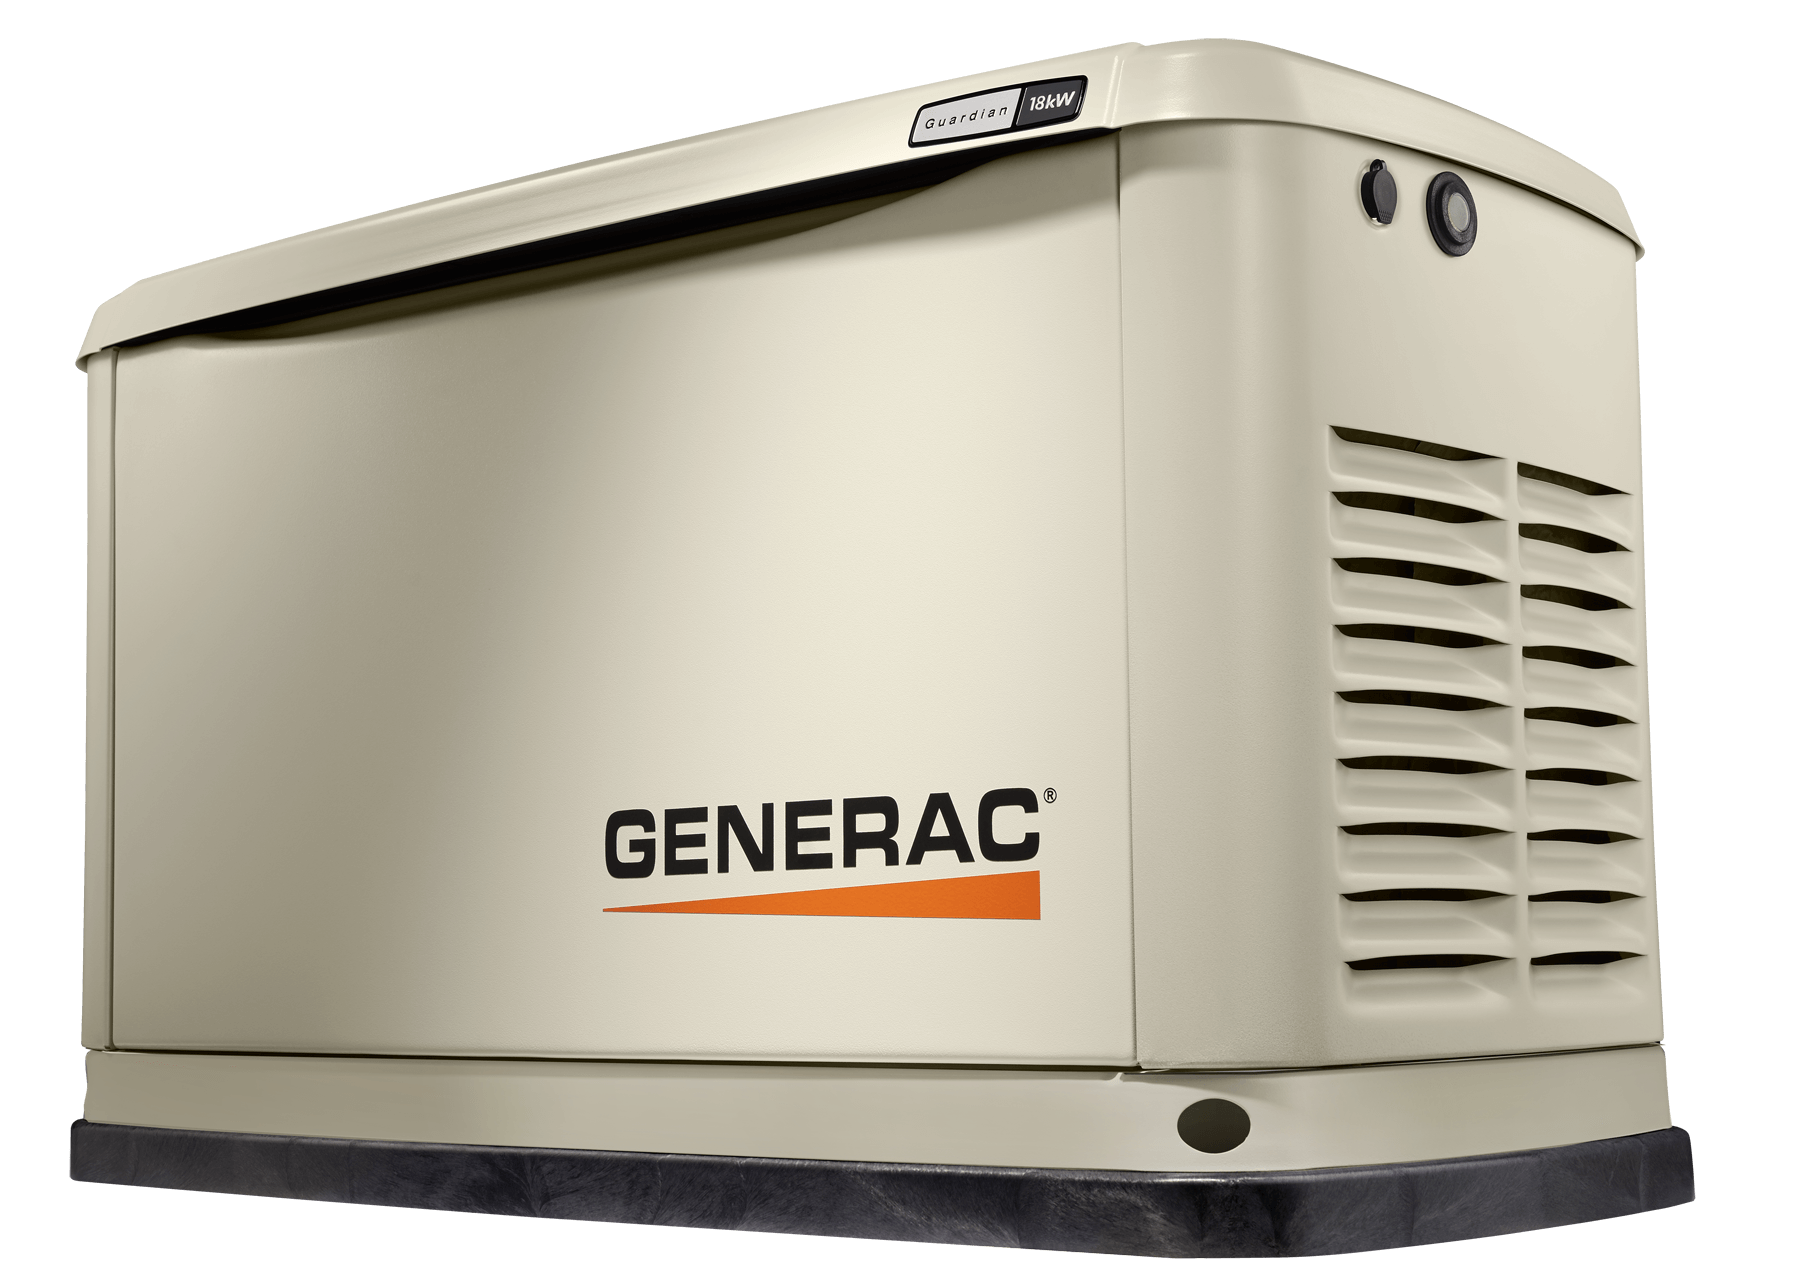 Standby Generator 18kW WiFi-Enabled MODEL #7226 product image